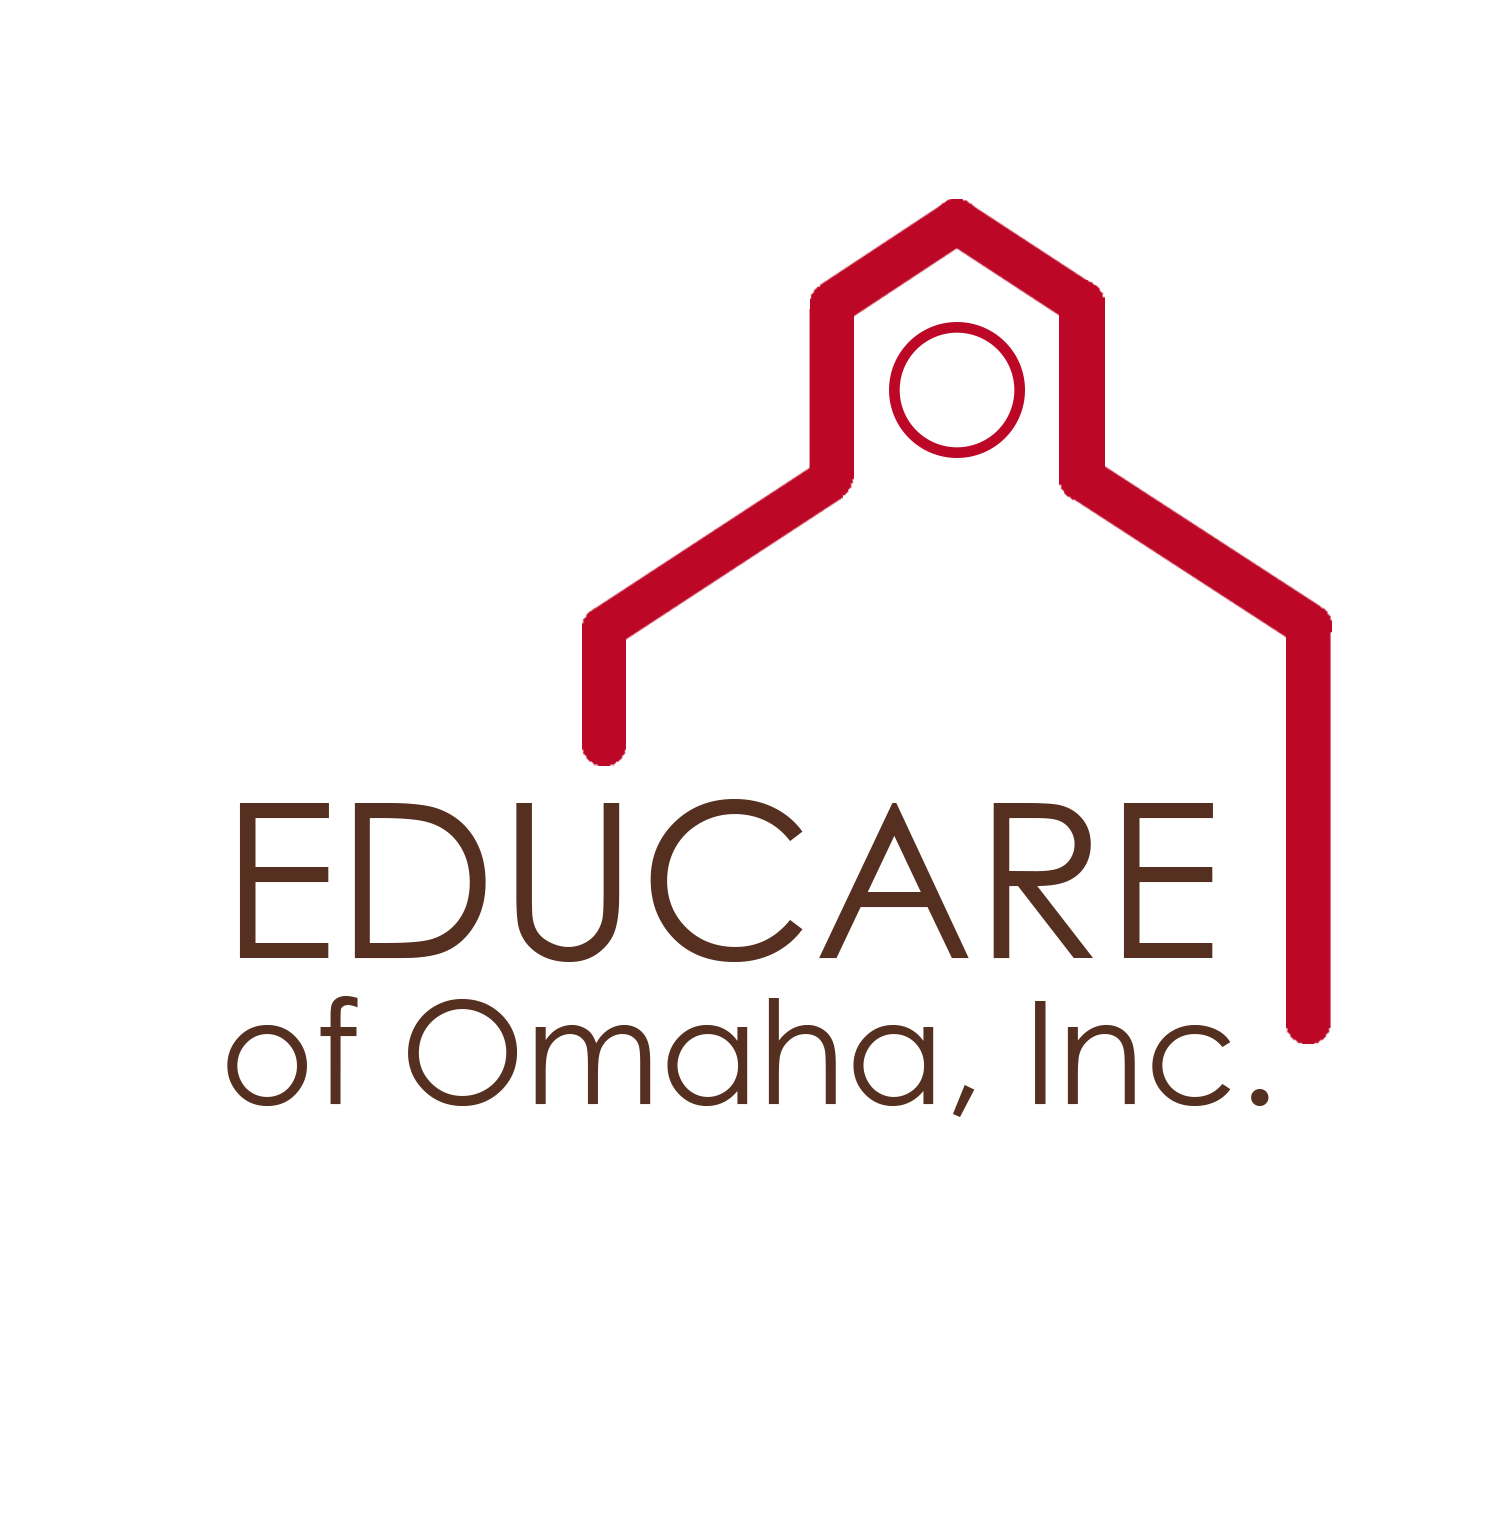 Red school house logo with the words "EDUCARE of Omaha, Inc."